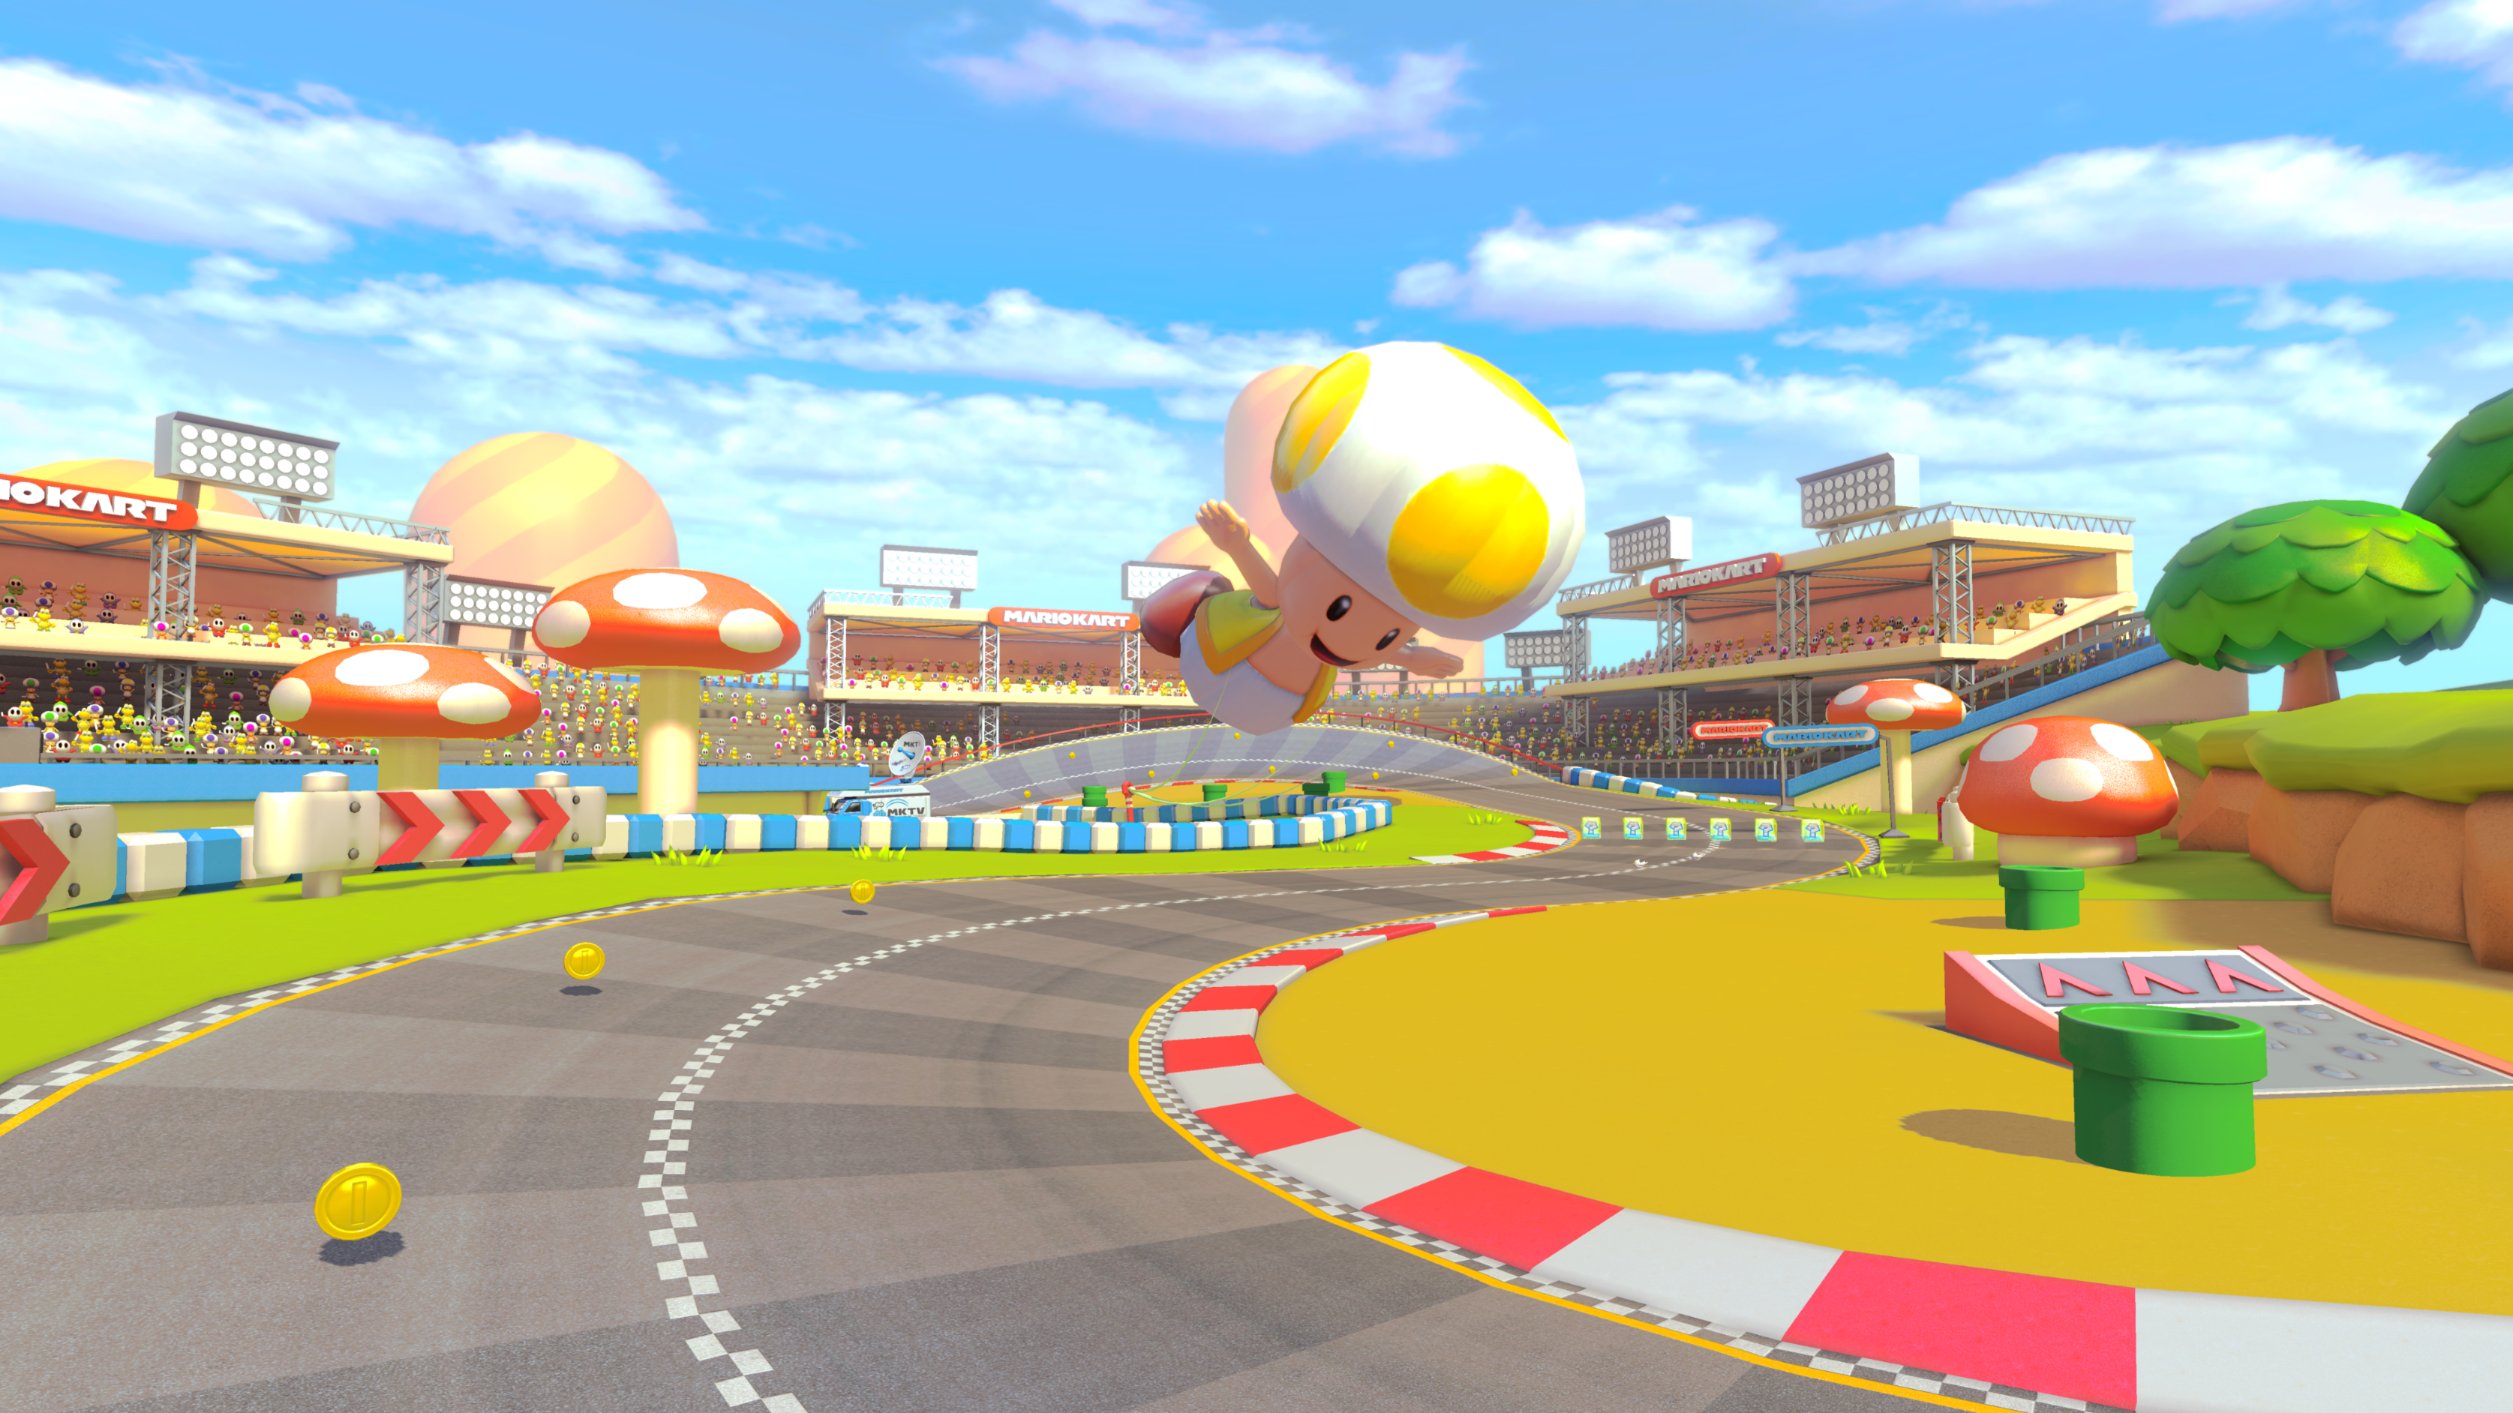 Monty Mole with MKT Animations [Mario Kart 8] [Mods]